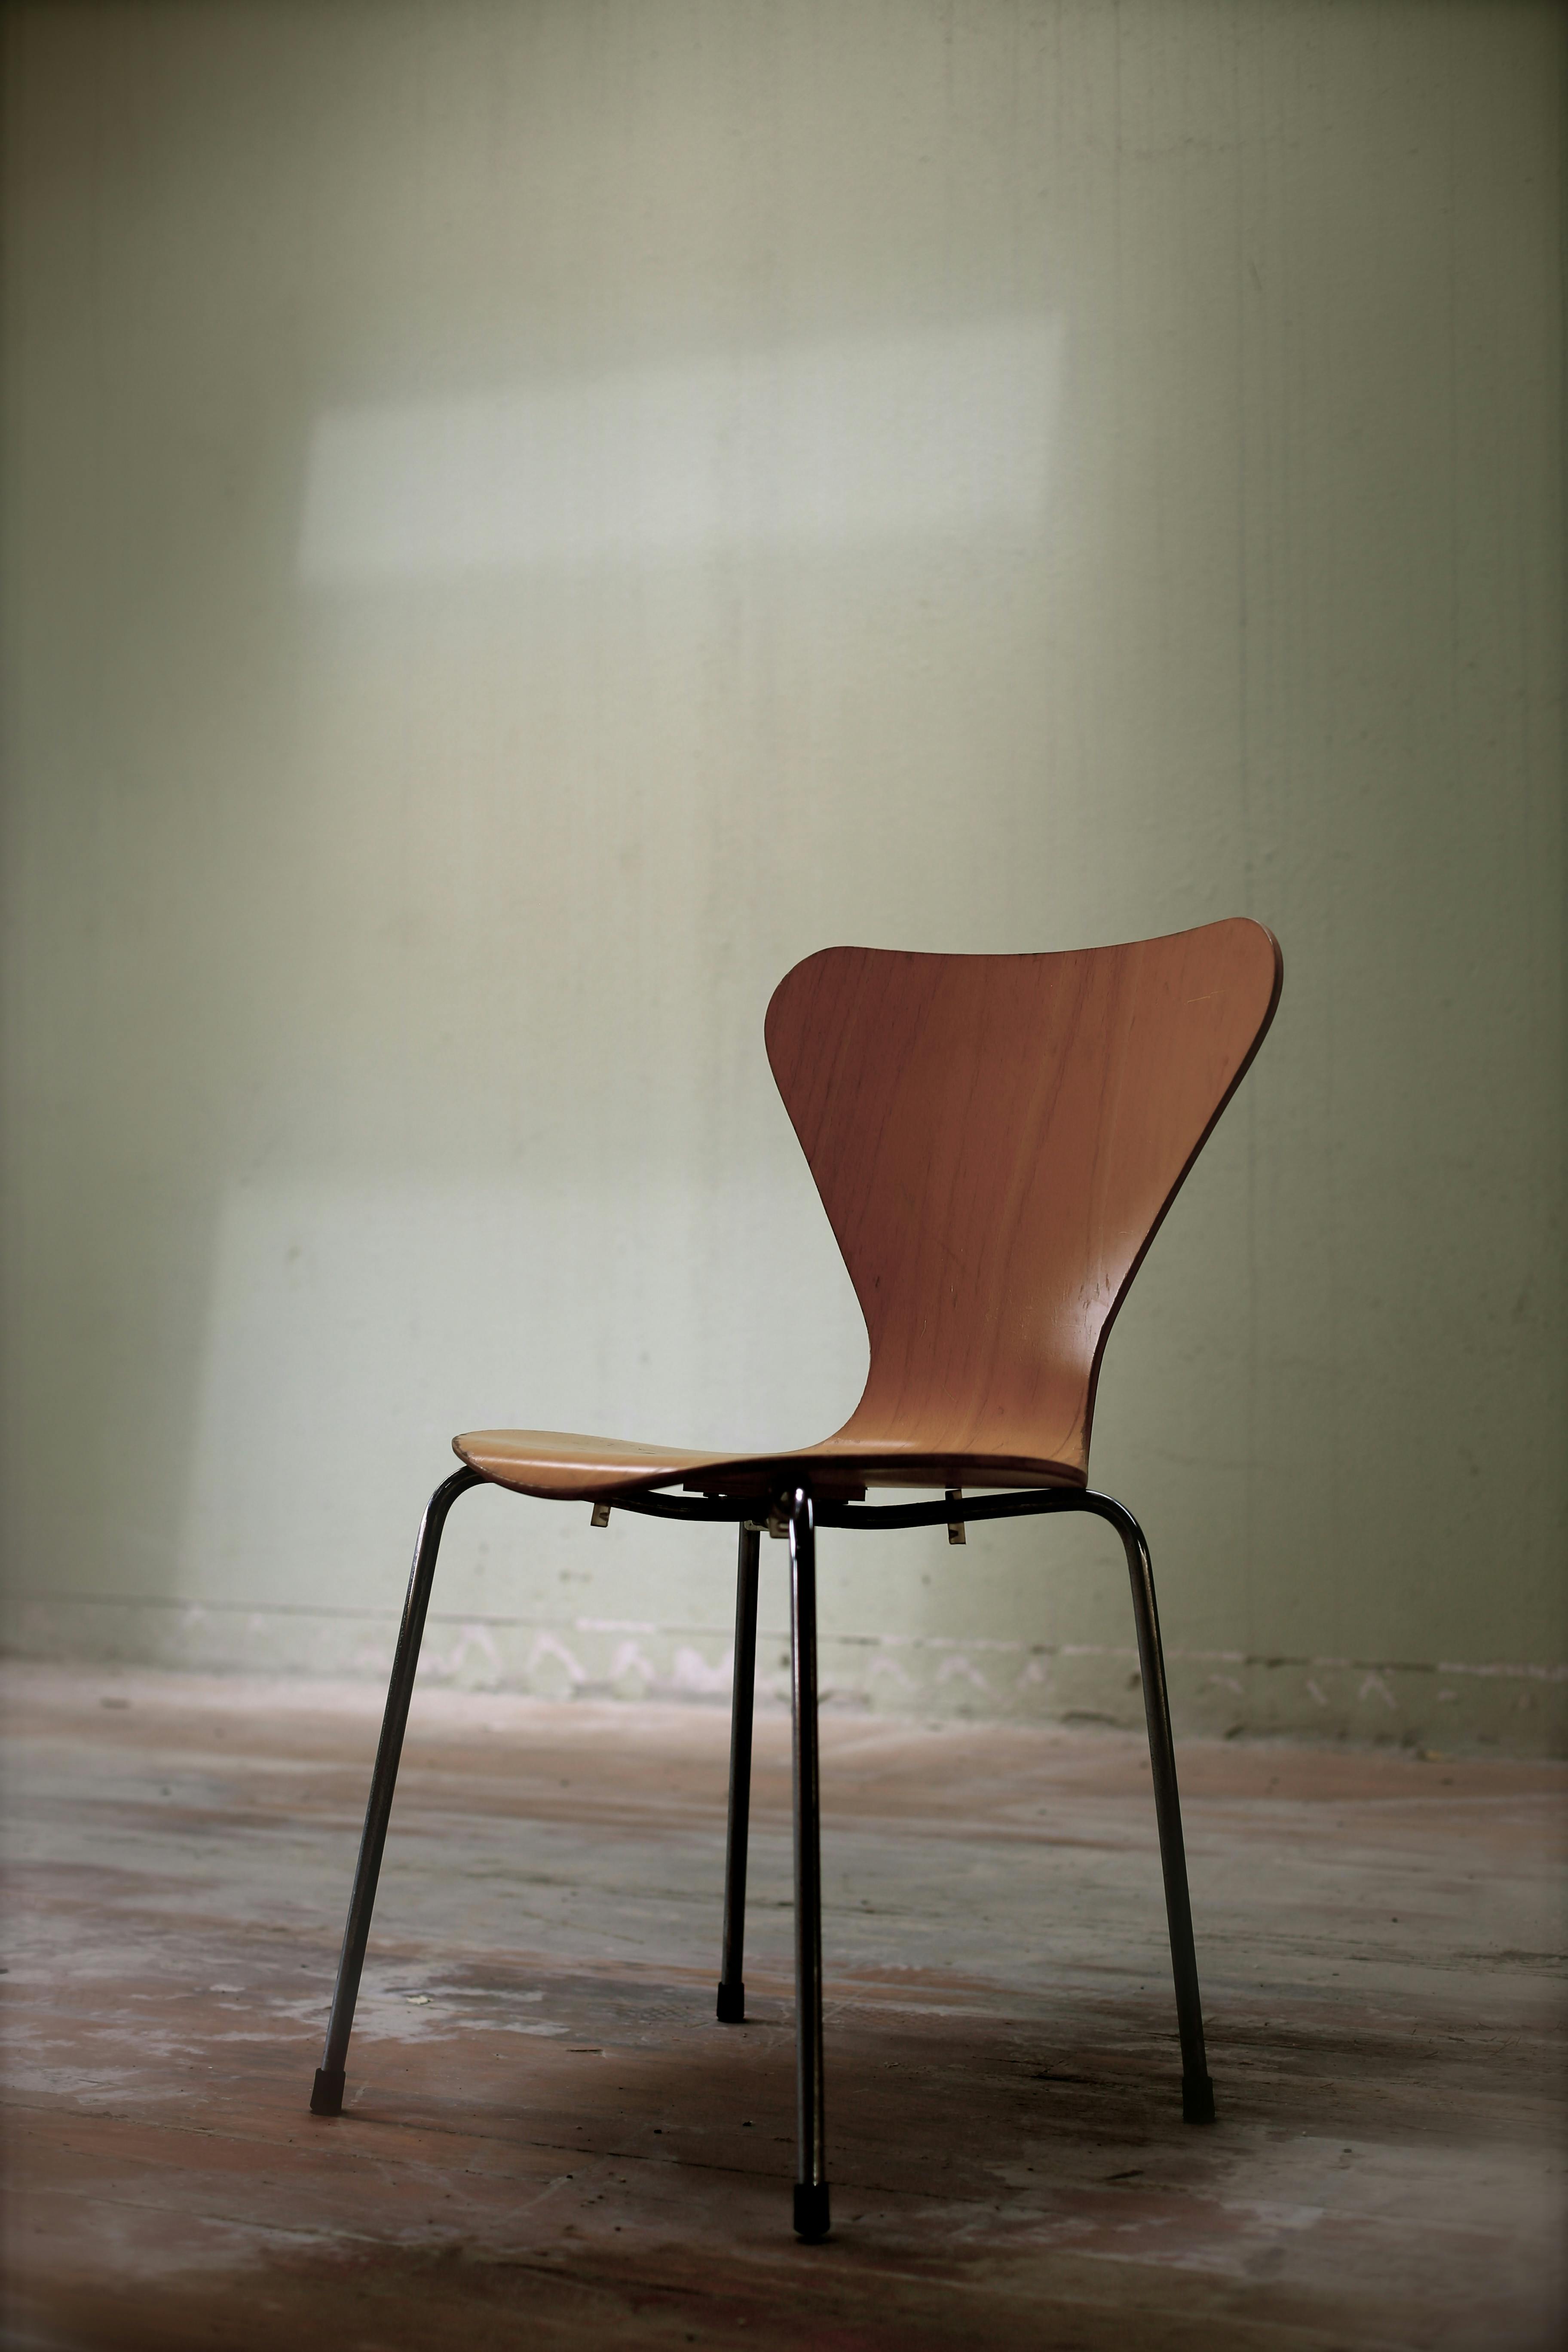 Brown and Black Chair on Brown Surface · Free Stock Photo